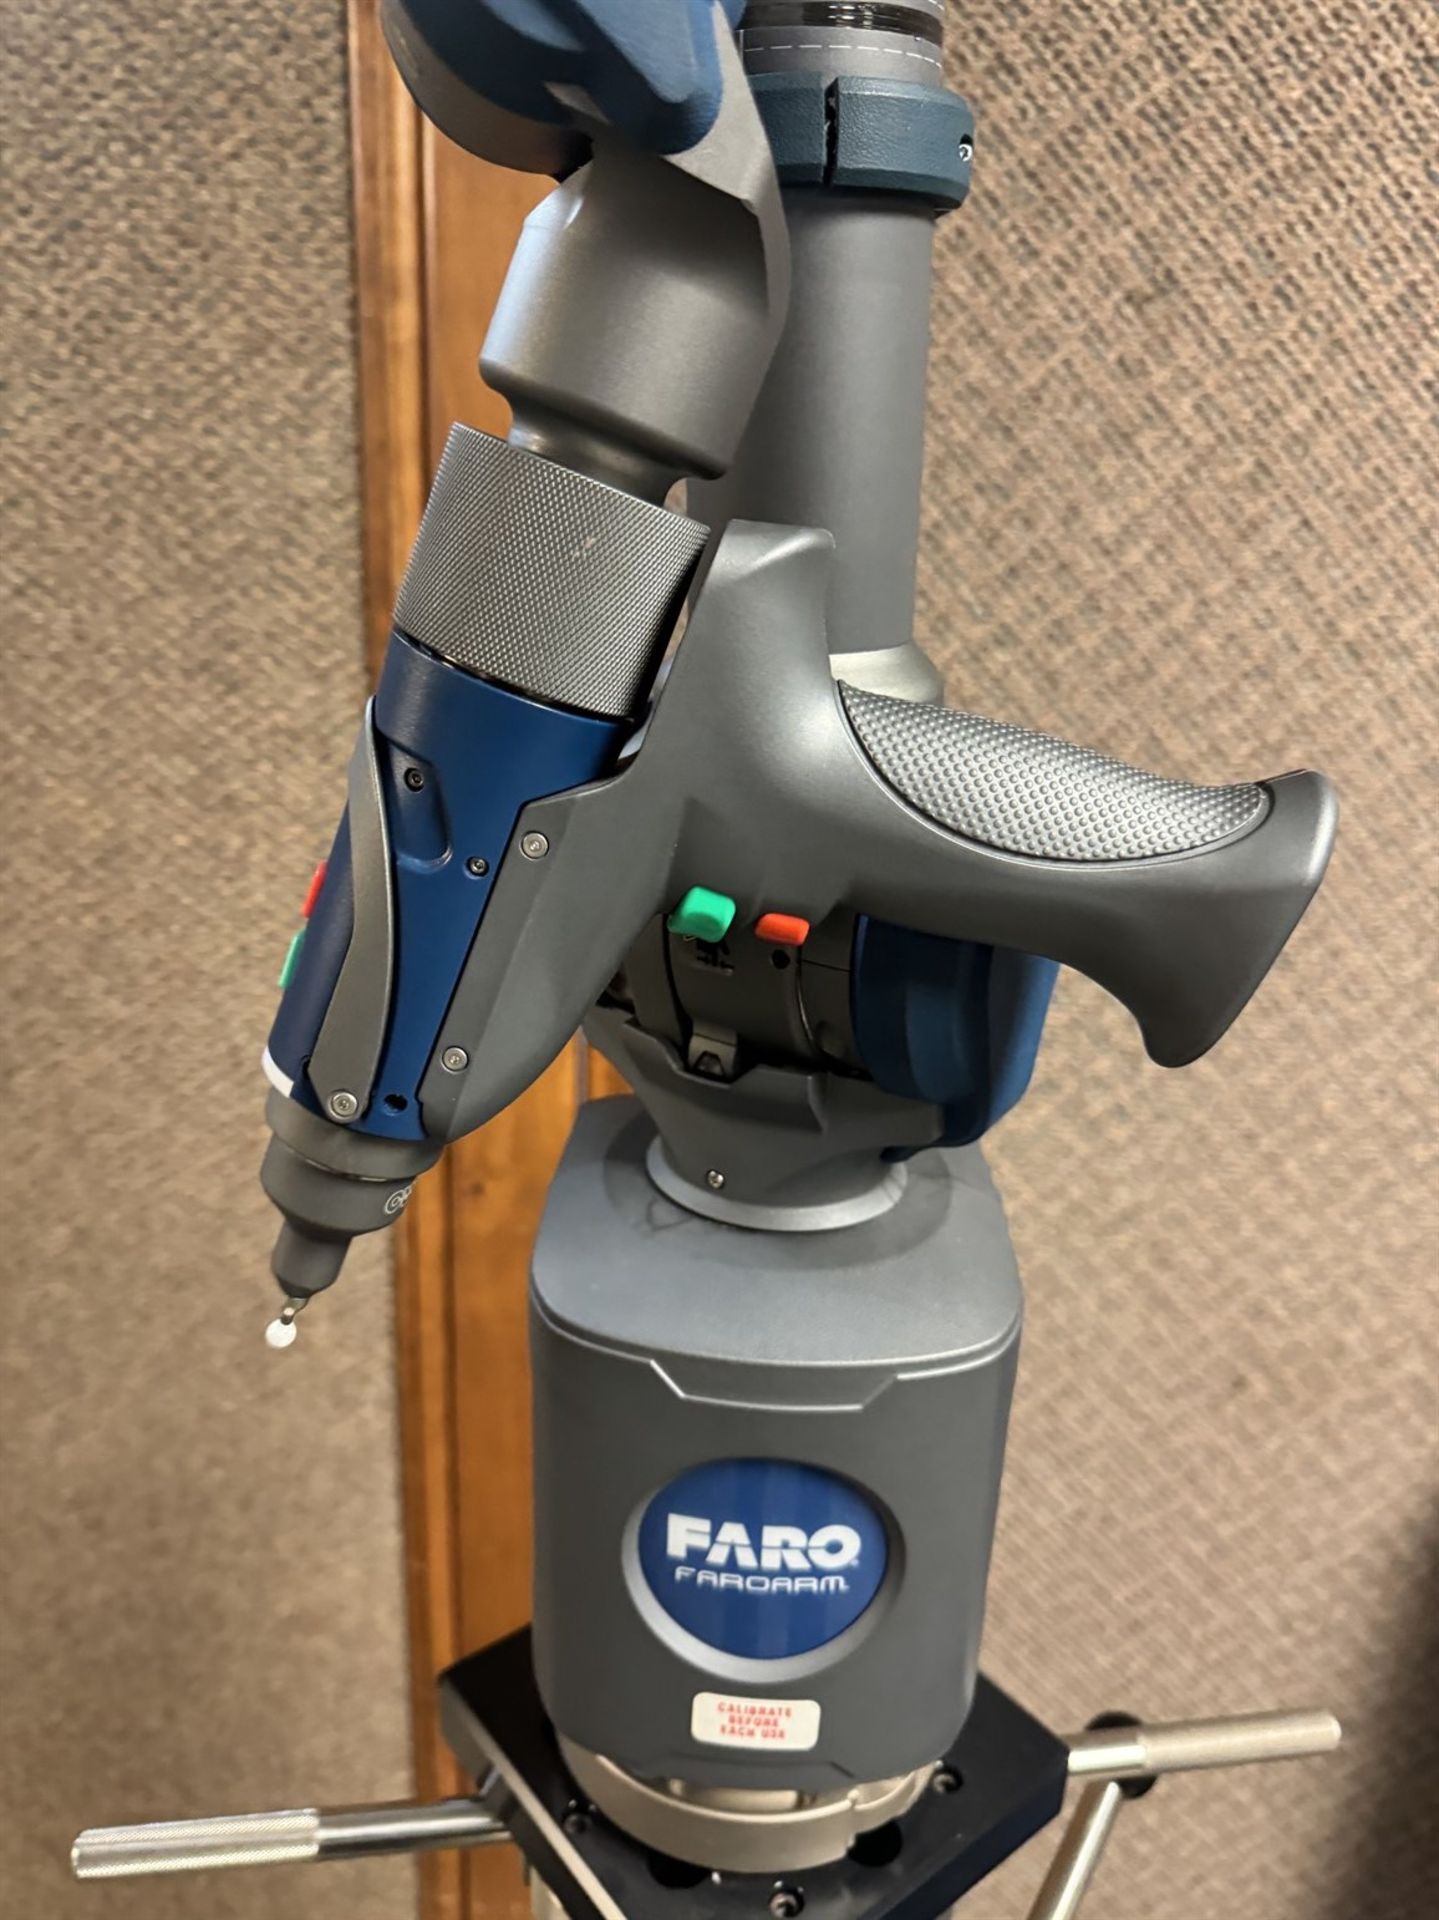 2017 FARO QUANTUM S 21000 Portable CMM, s/n W25-S5-17-15962, Stand, *NO Software* - Image 5 of 8